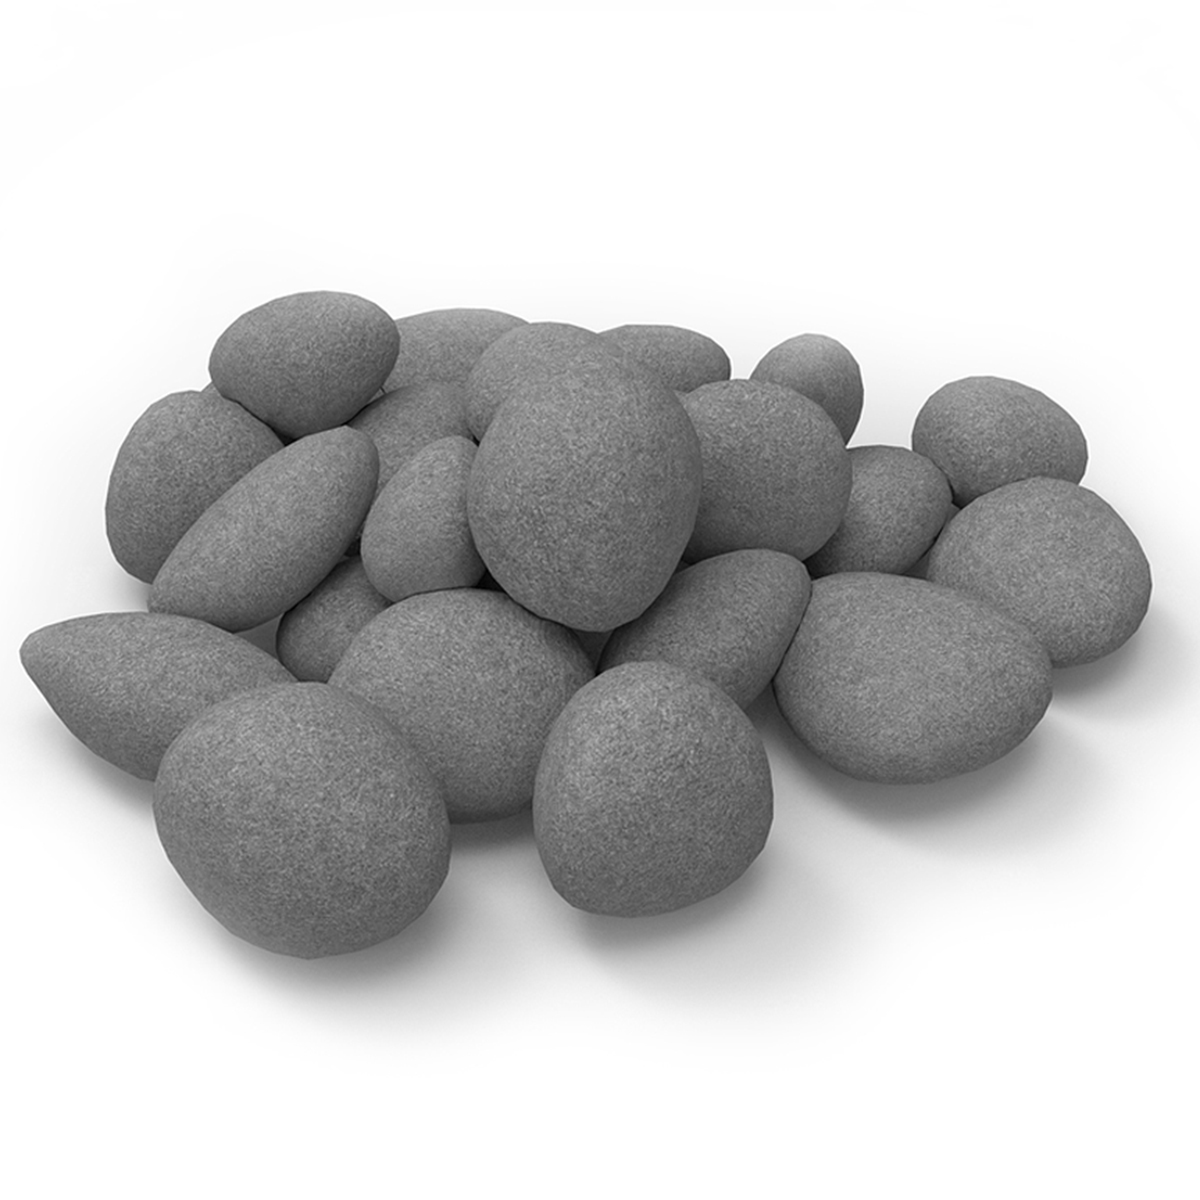 Rfa1000gr-gl Light Weight Ceramic Fiber Gas Ethanol Electric Fireplace Pebbles In Gray - Set Of 24